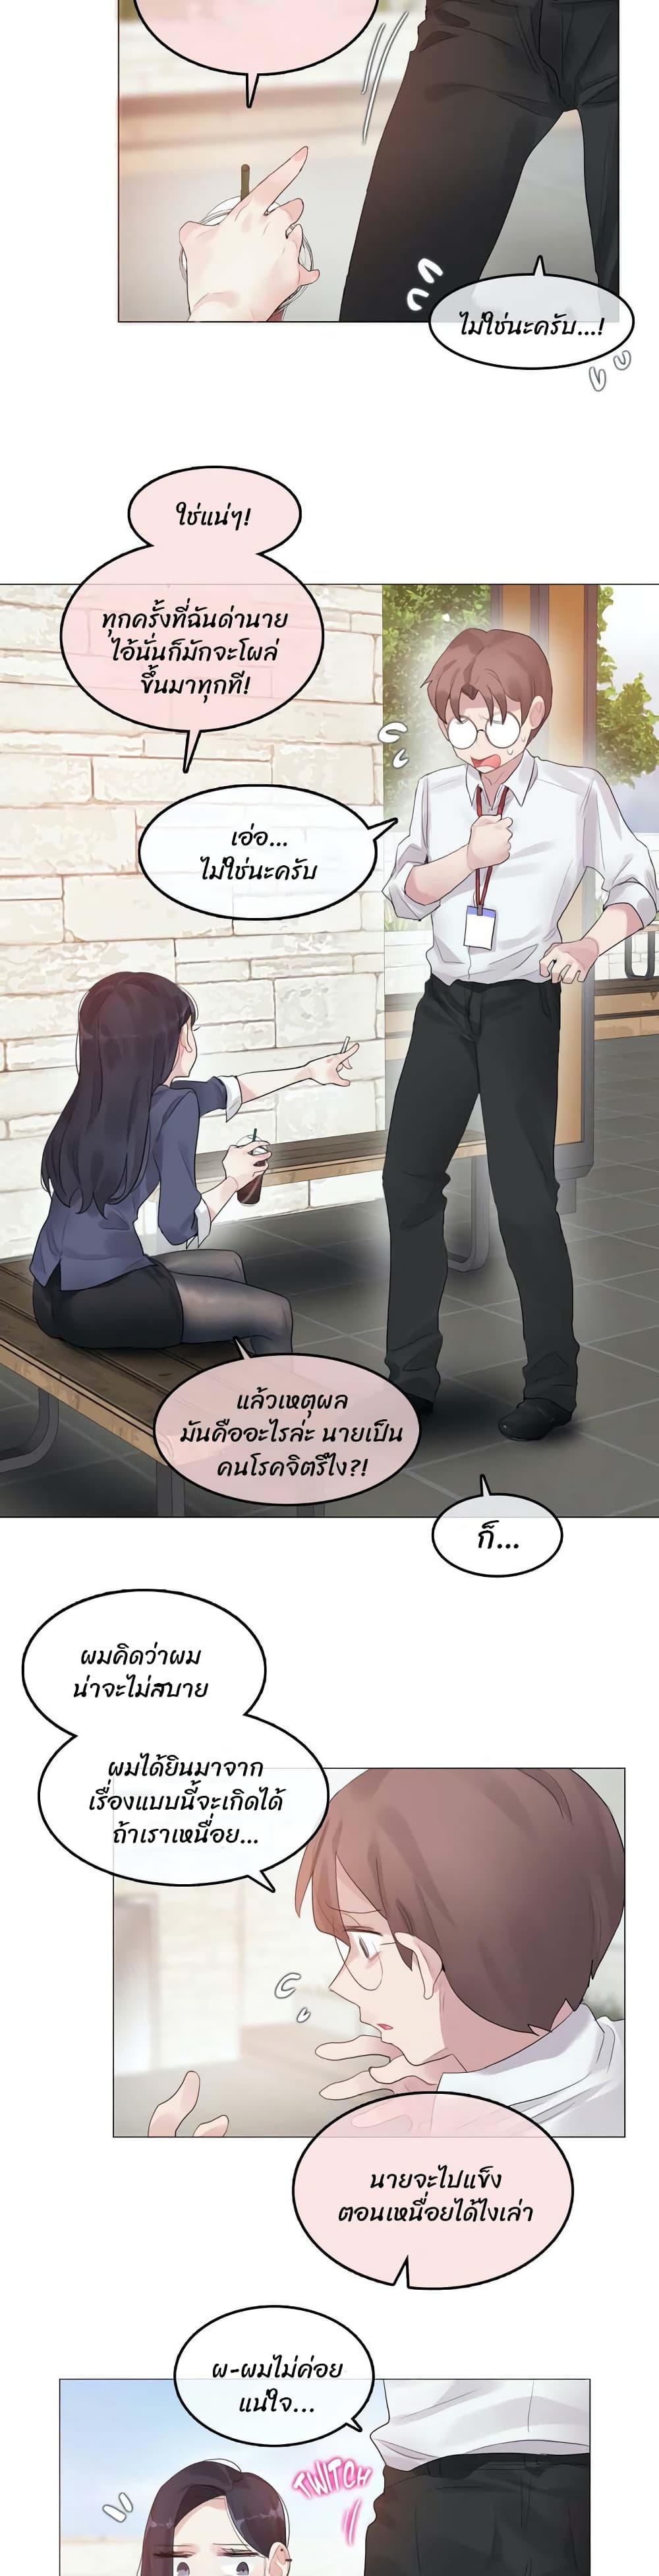 A Pervert’s Daily Life 94 08